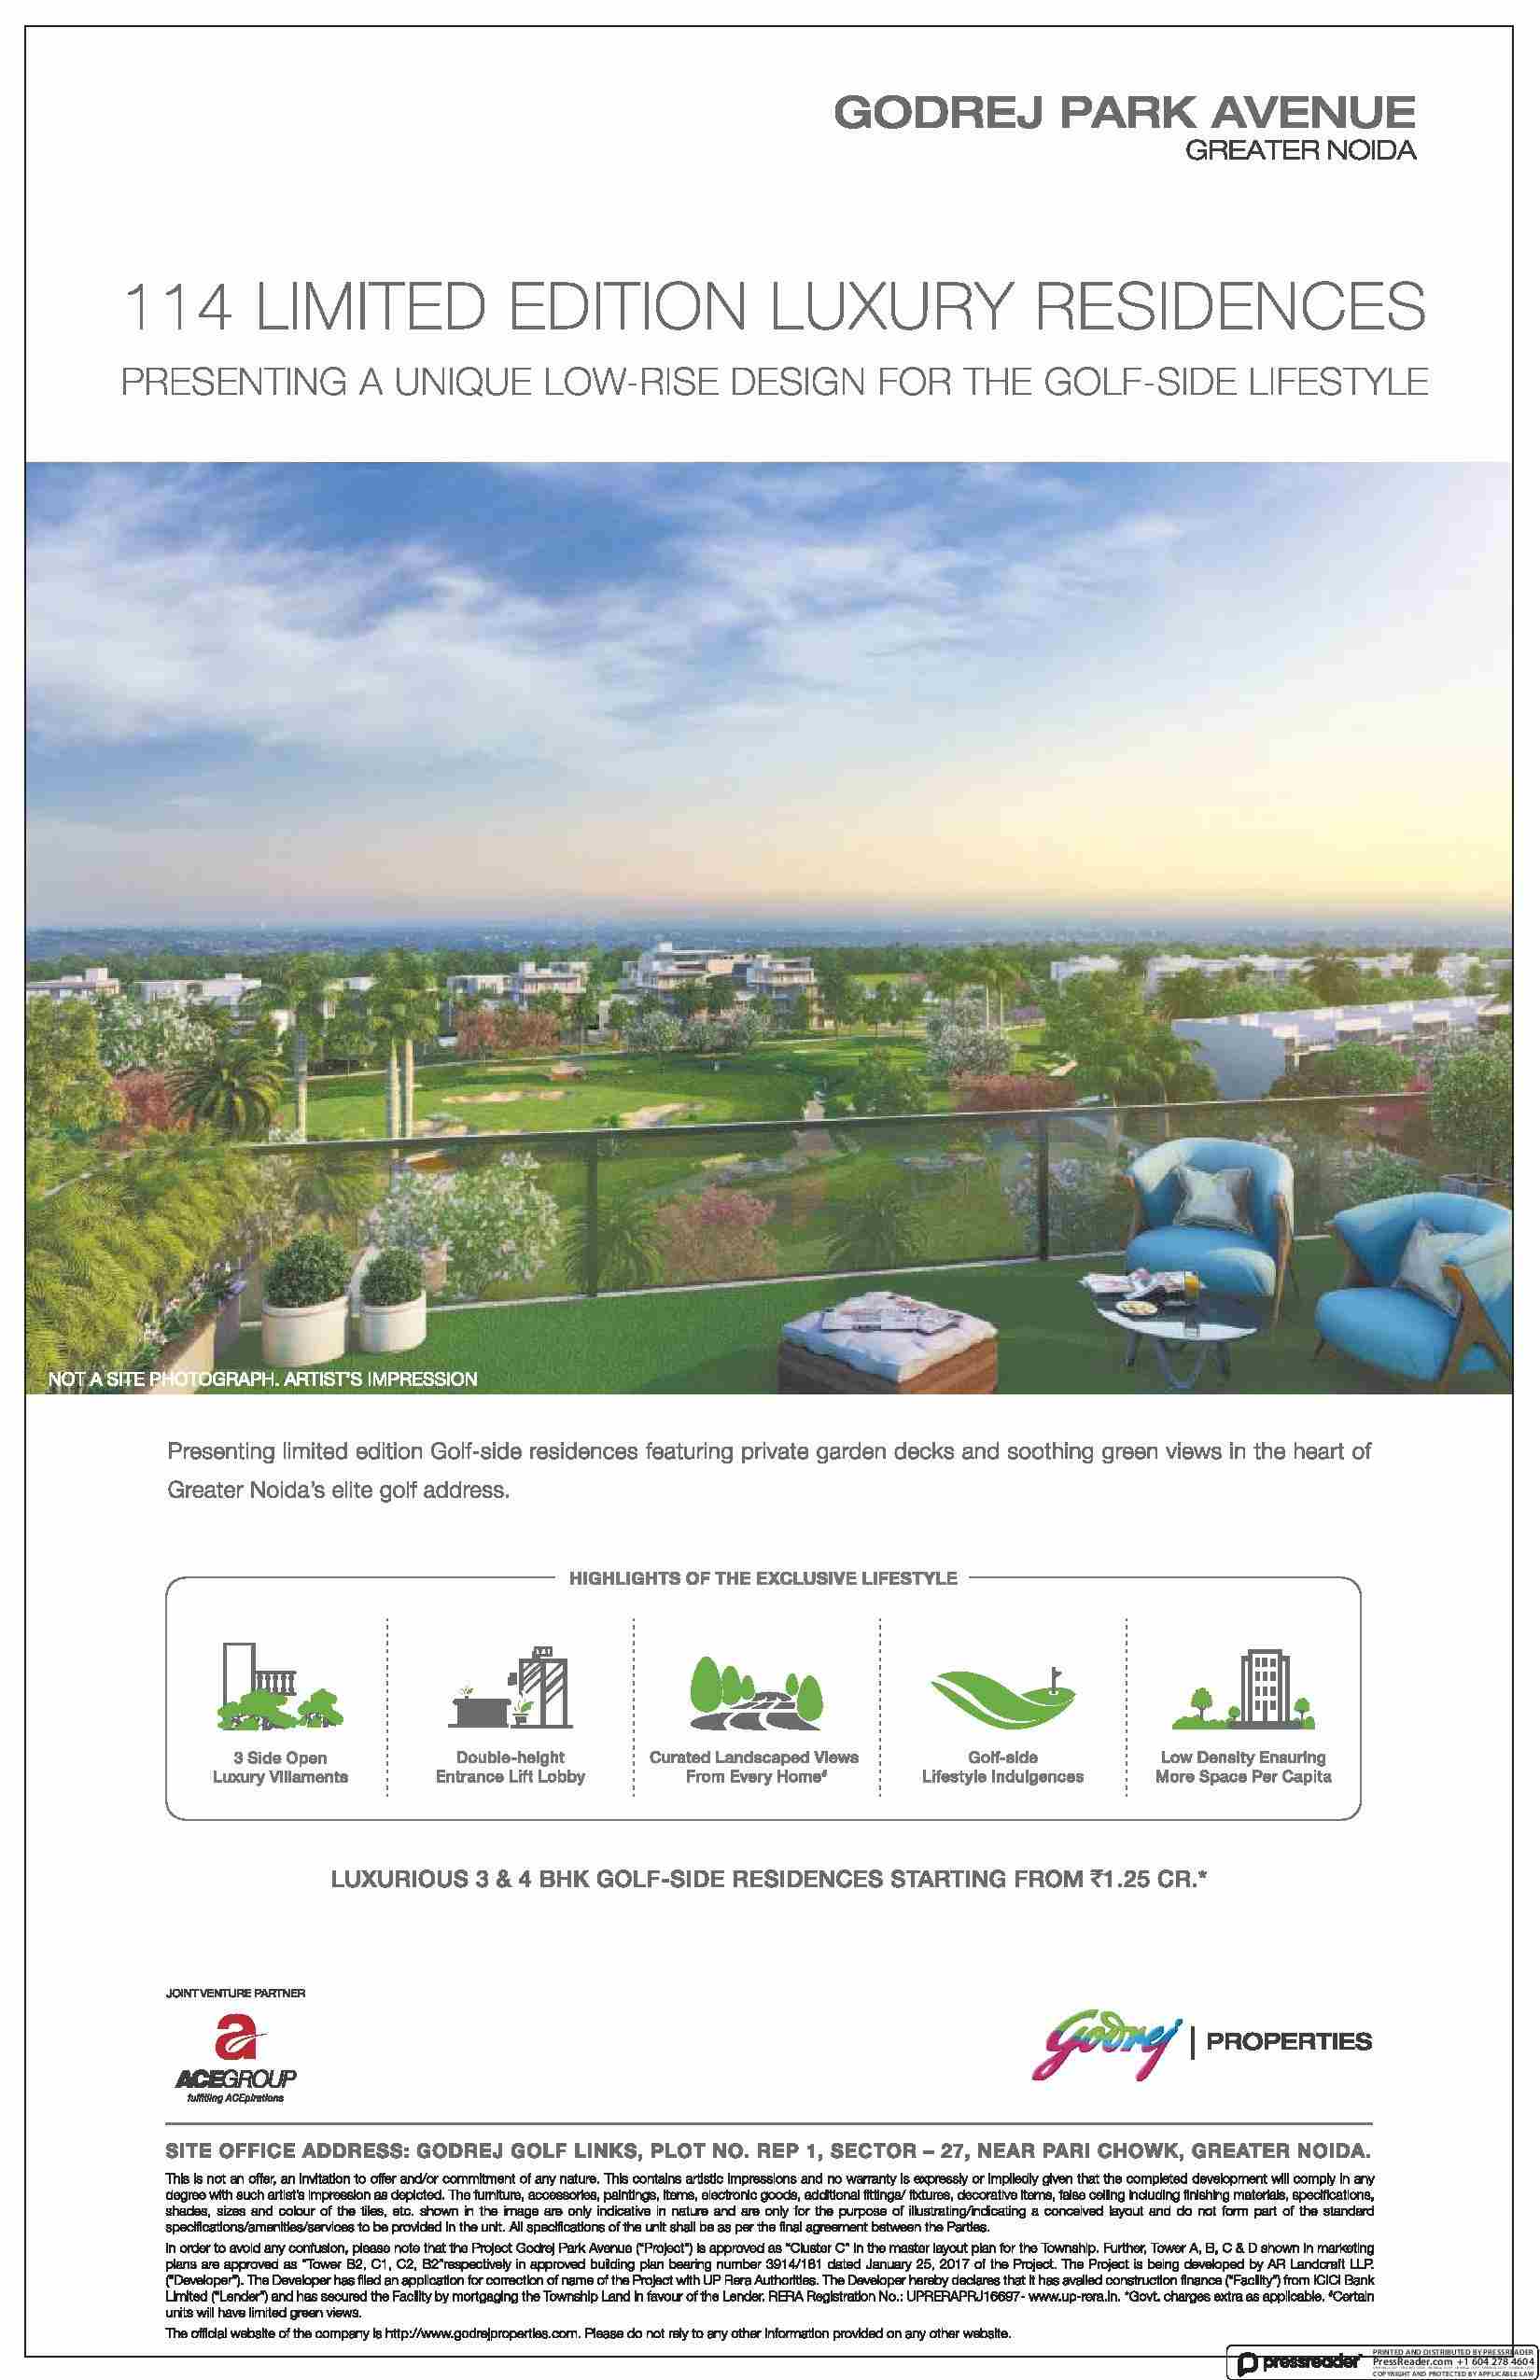 Book luxurious 3 & 4 BHK golf side residences @ Rs. 1.25 cr. at Godrej Park Avenue in Greater Noida Update